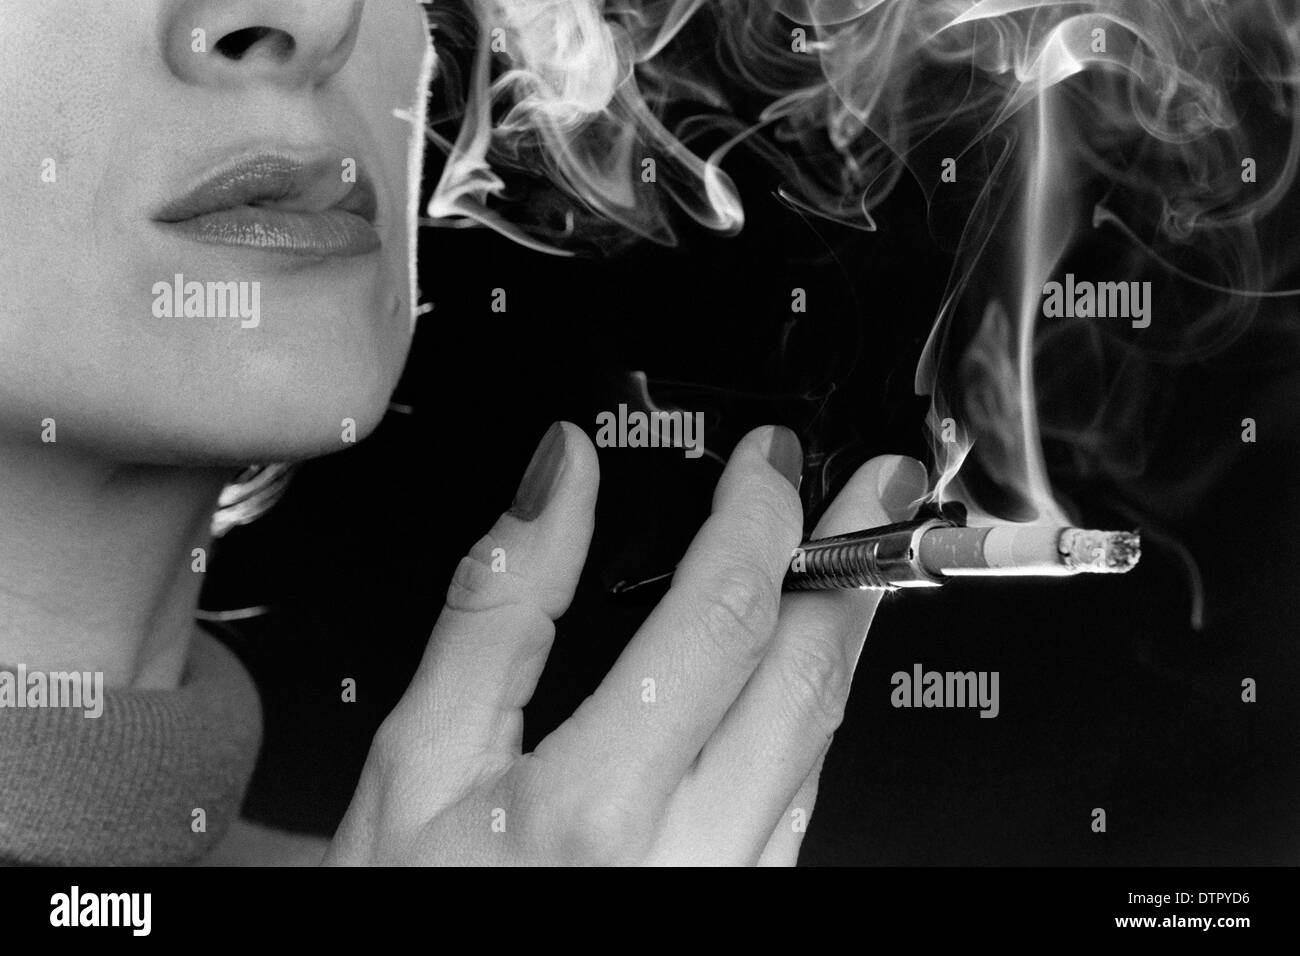 A close-up of a woman smoking a cigarette using a cigarette holder Stock Photo